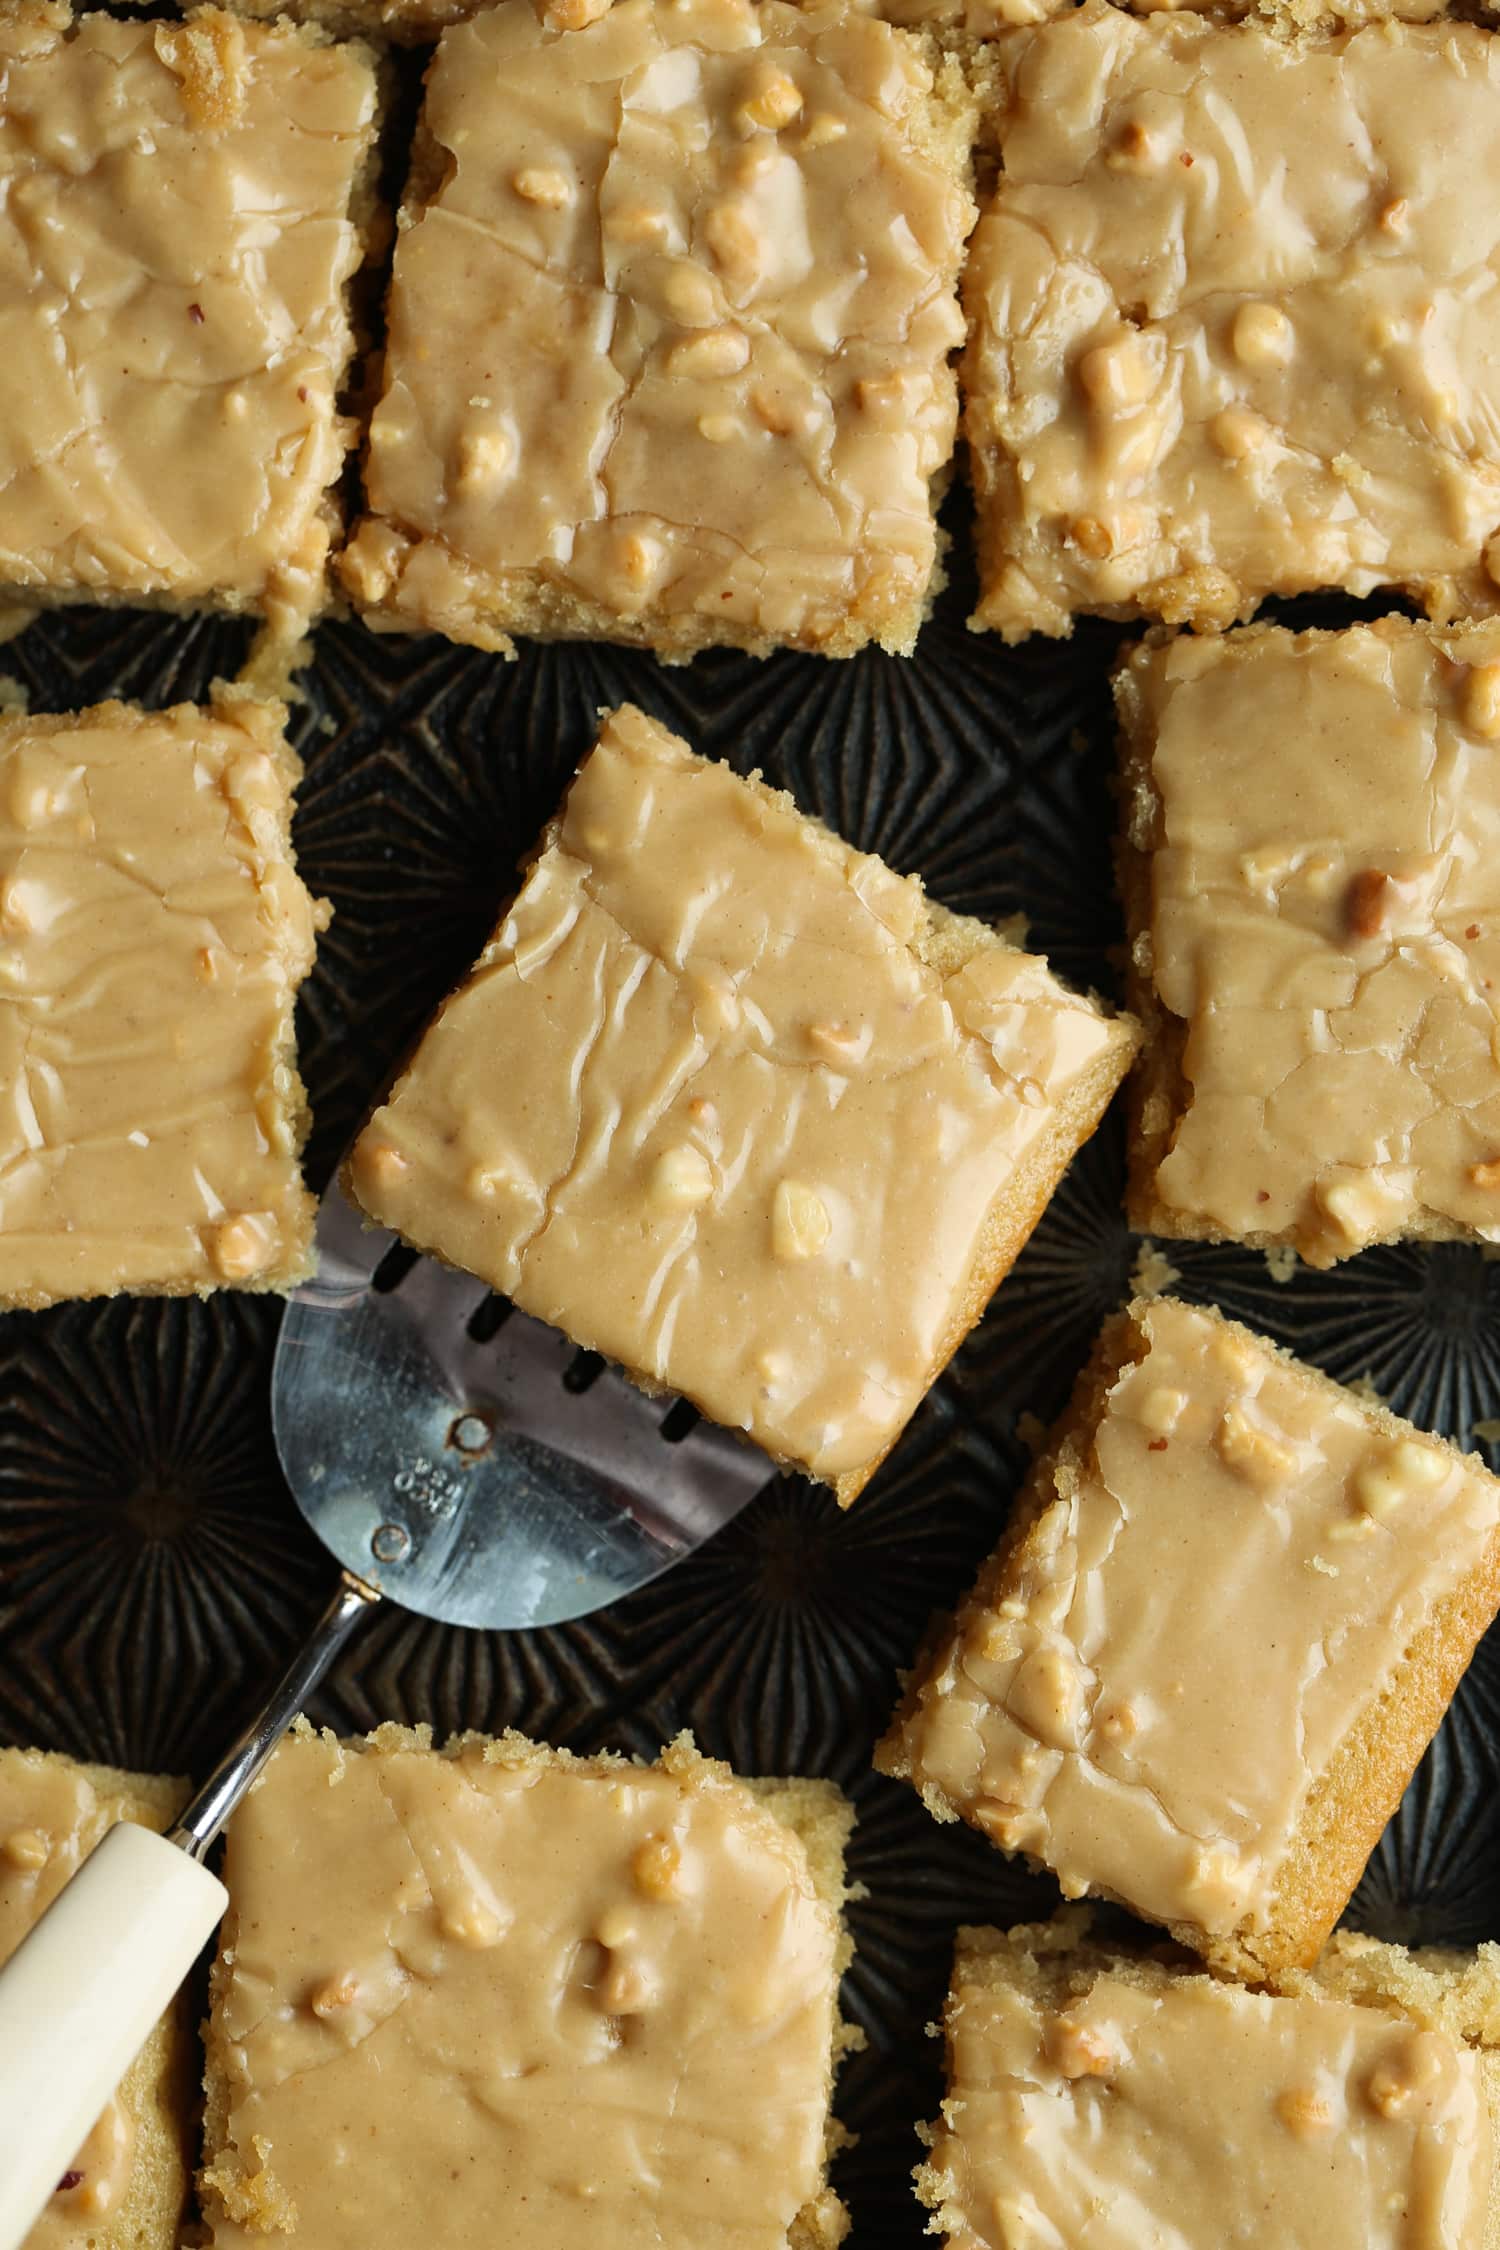 Square slices of peanut butter sheet cake with peanut butter frosting.